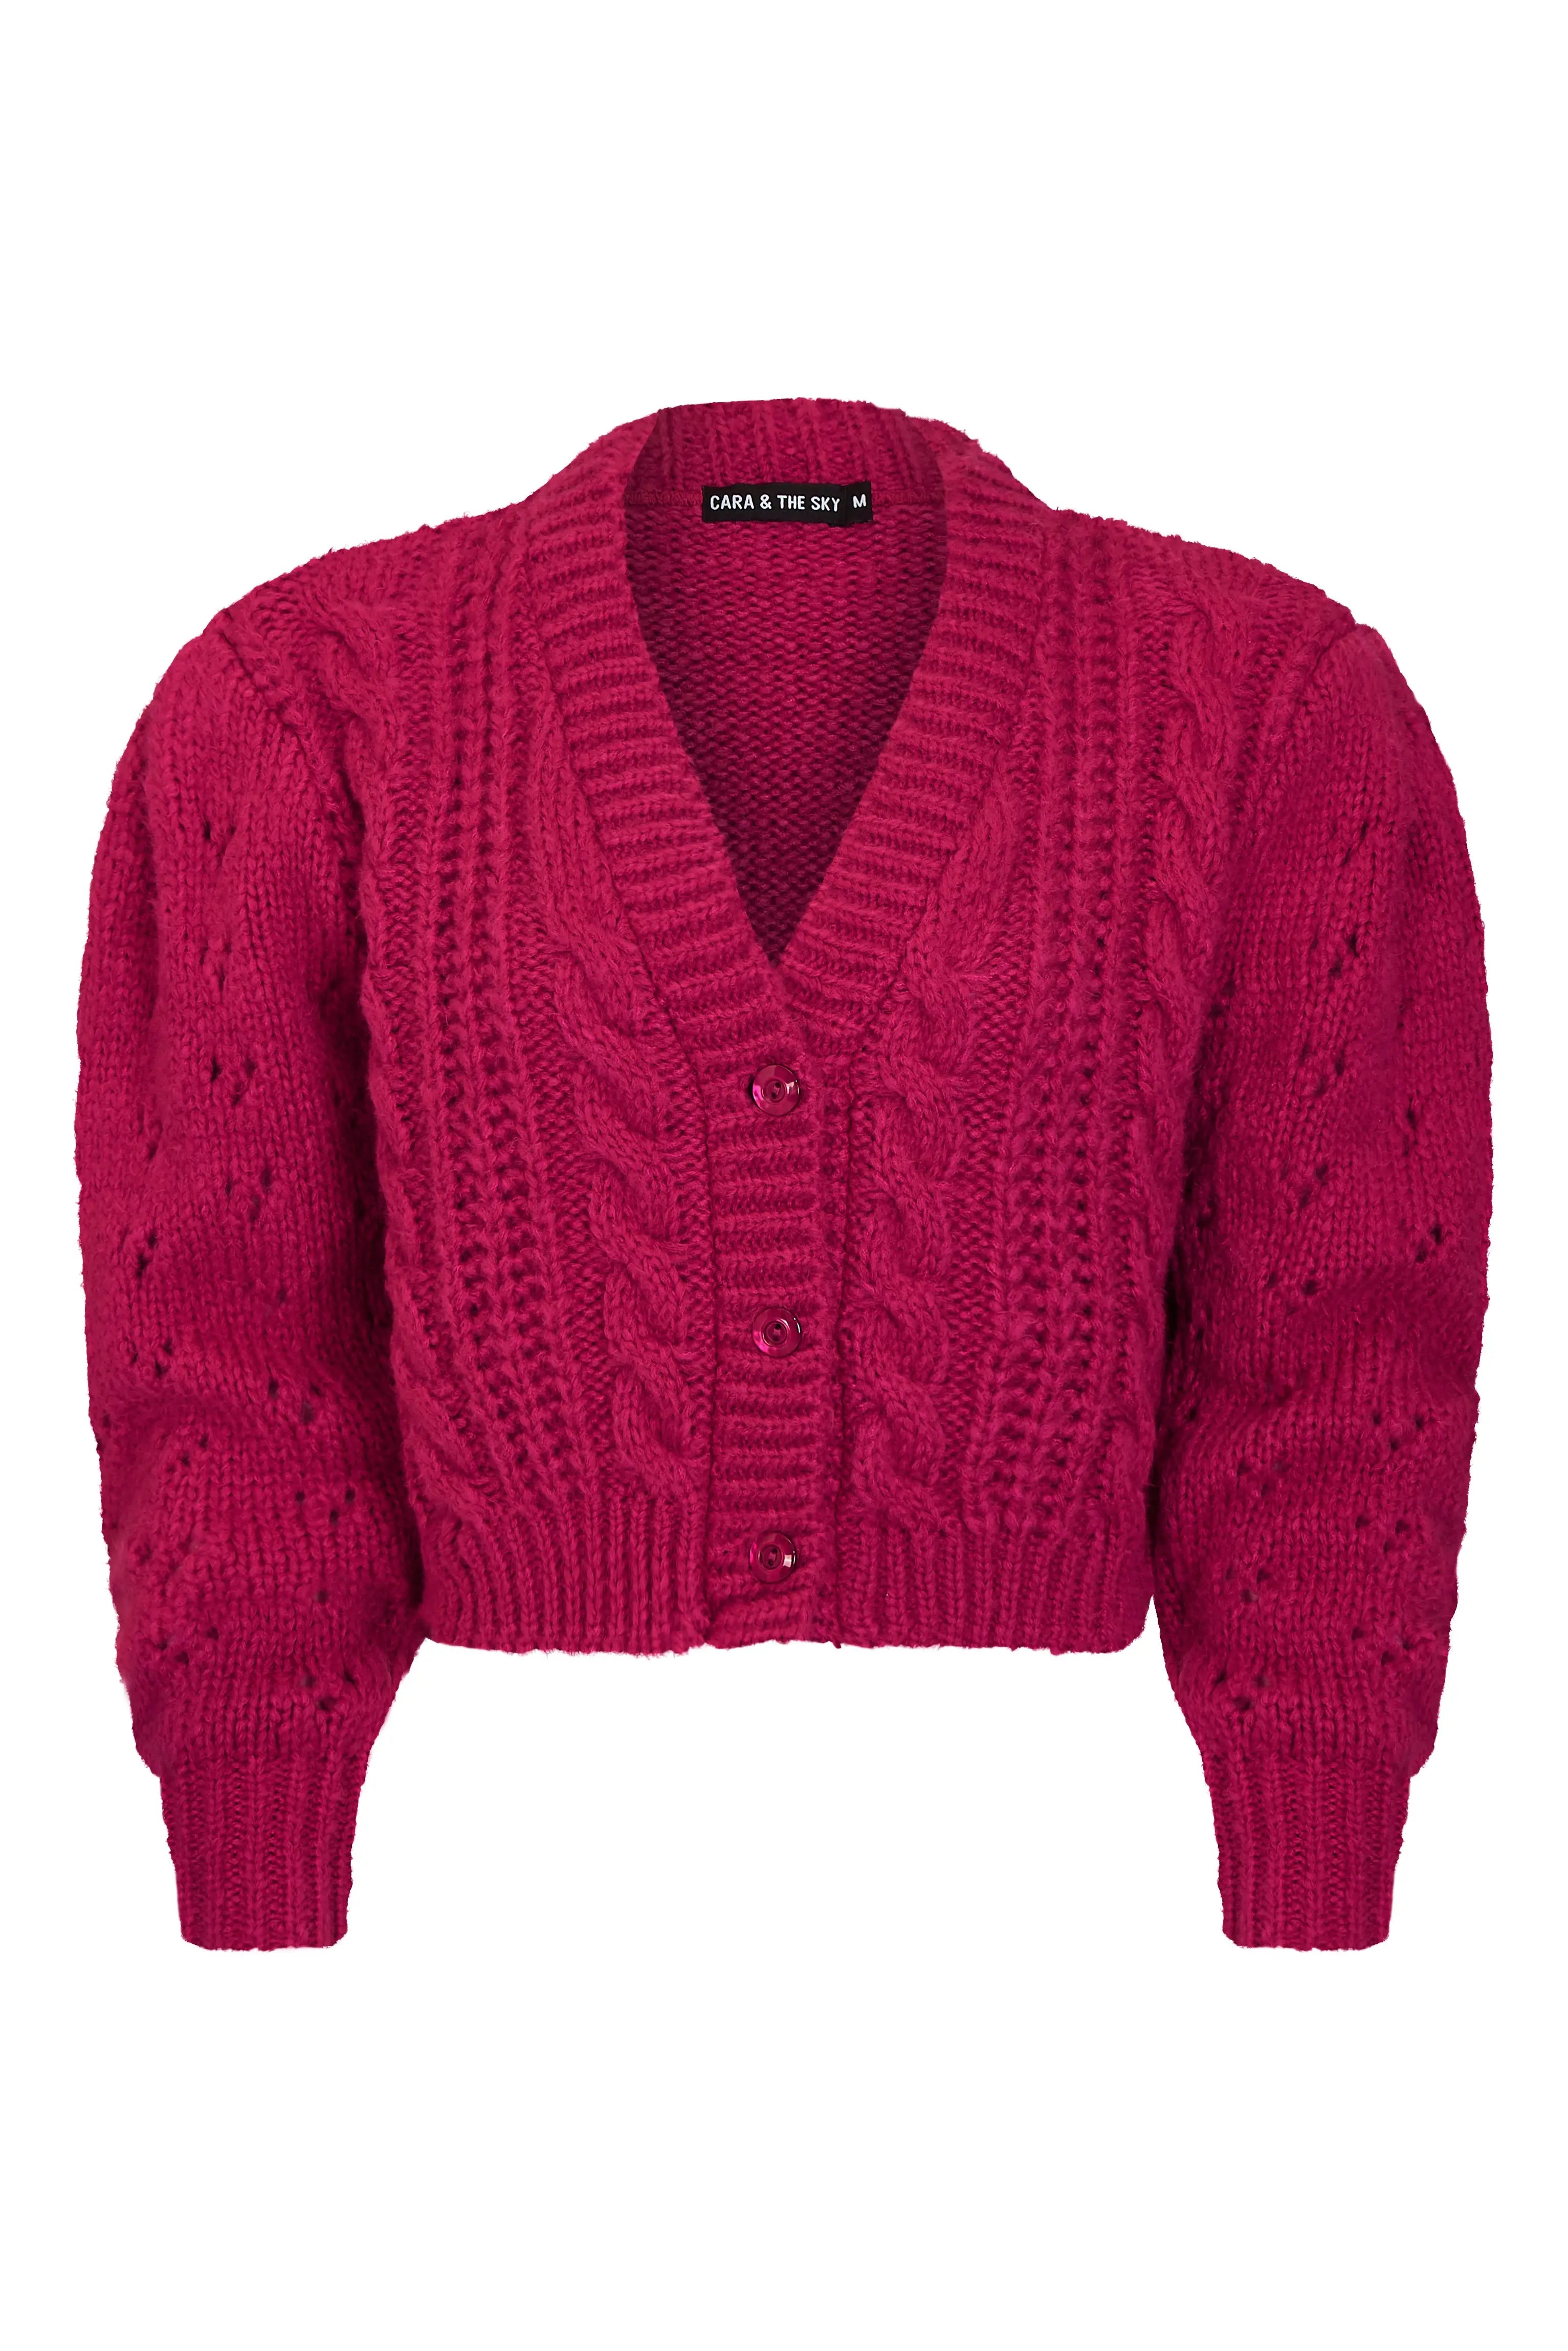 cara and the sky, womens hot pink cable knit cardigan, made in the UK, bright pink sweater, ethically and sustainable made, womens apparel, curate